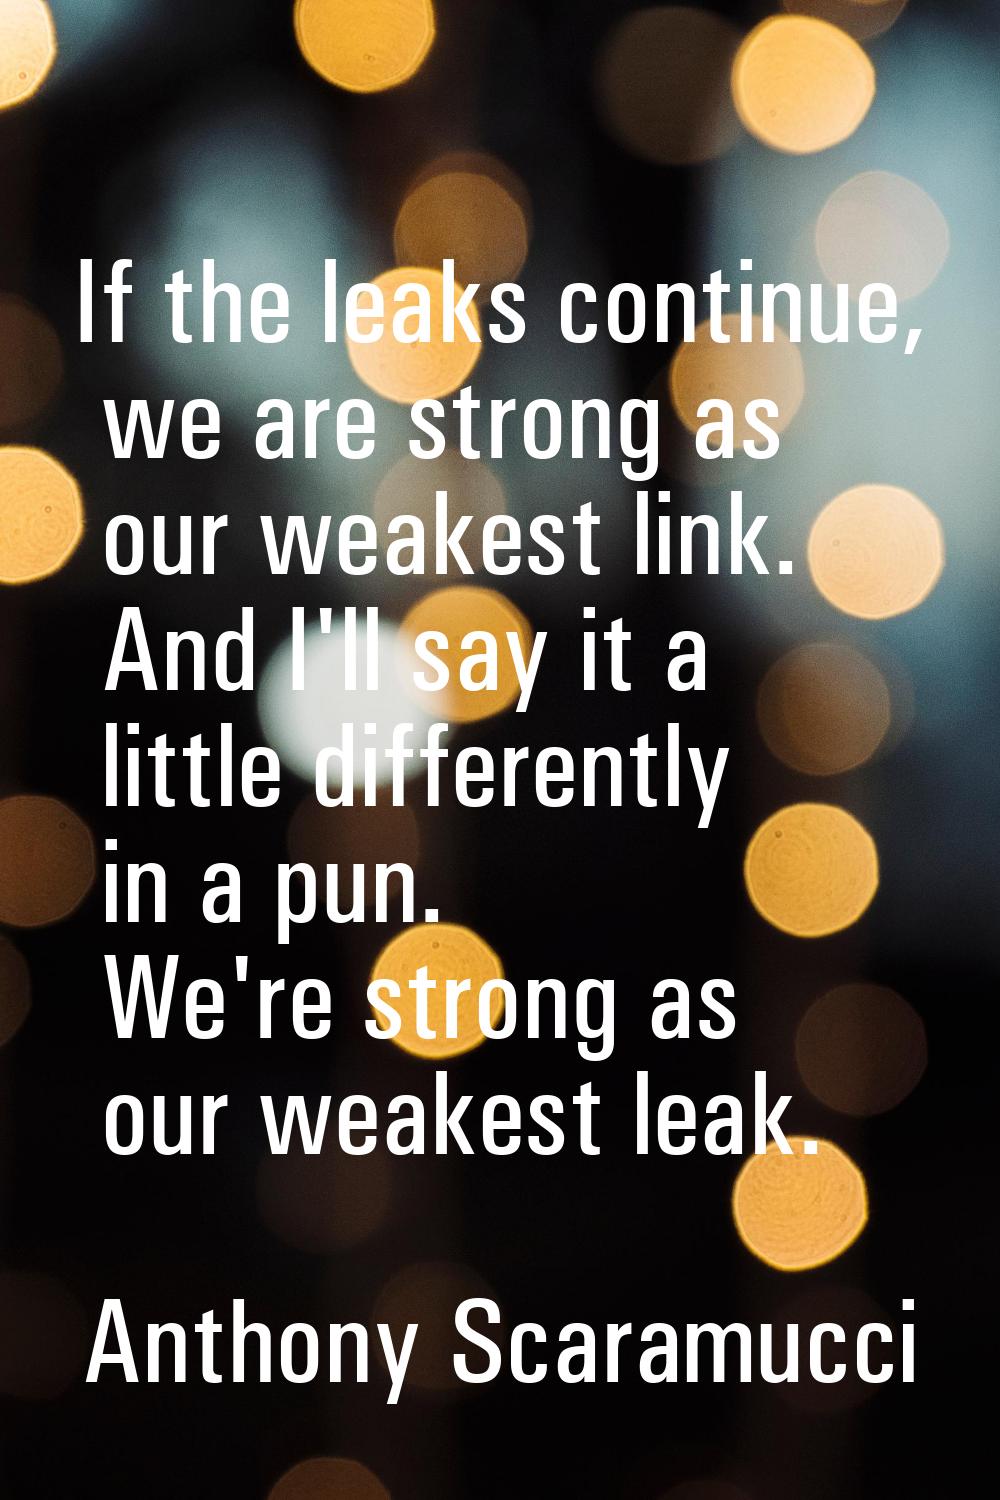 If the leaks continue, we are strong as our weakest link. And I'll say it a little differently in a